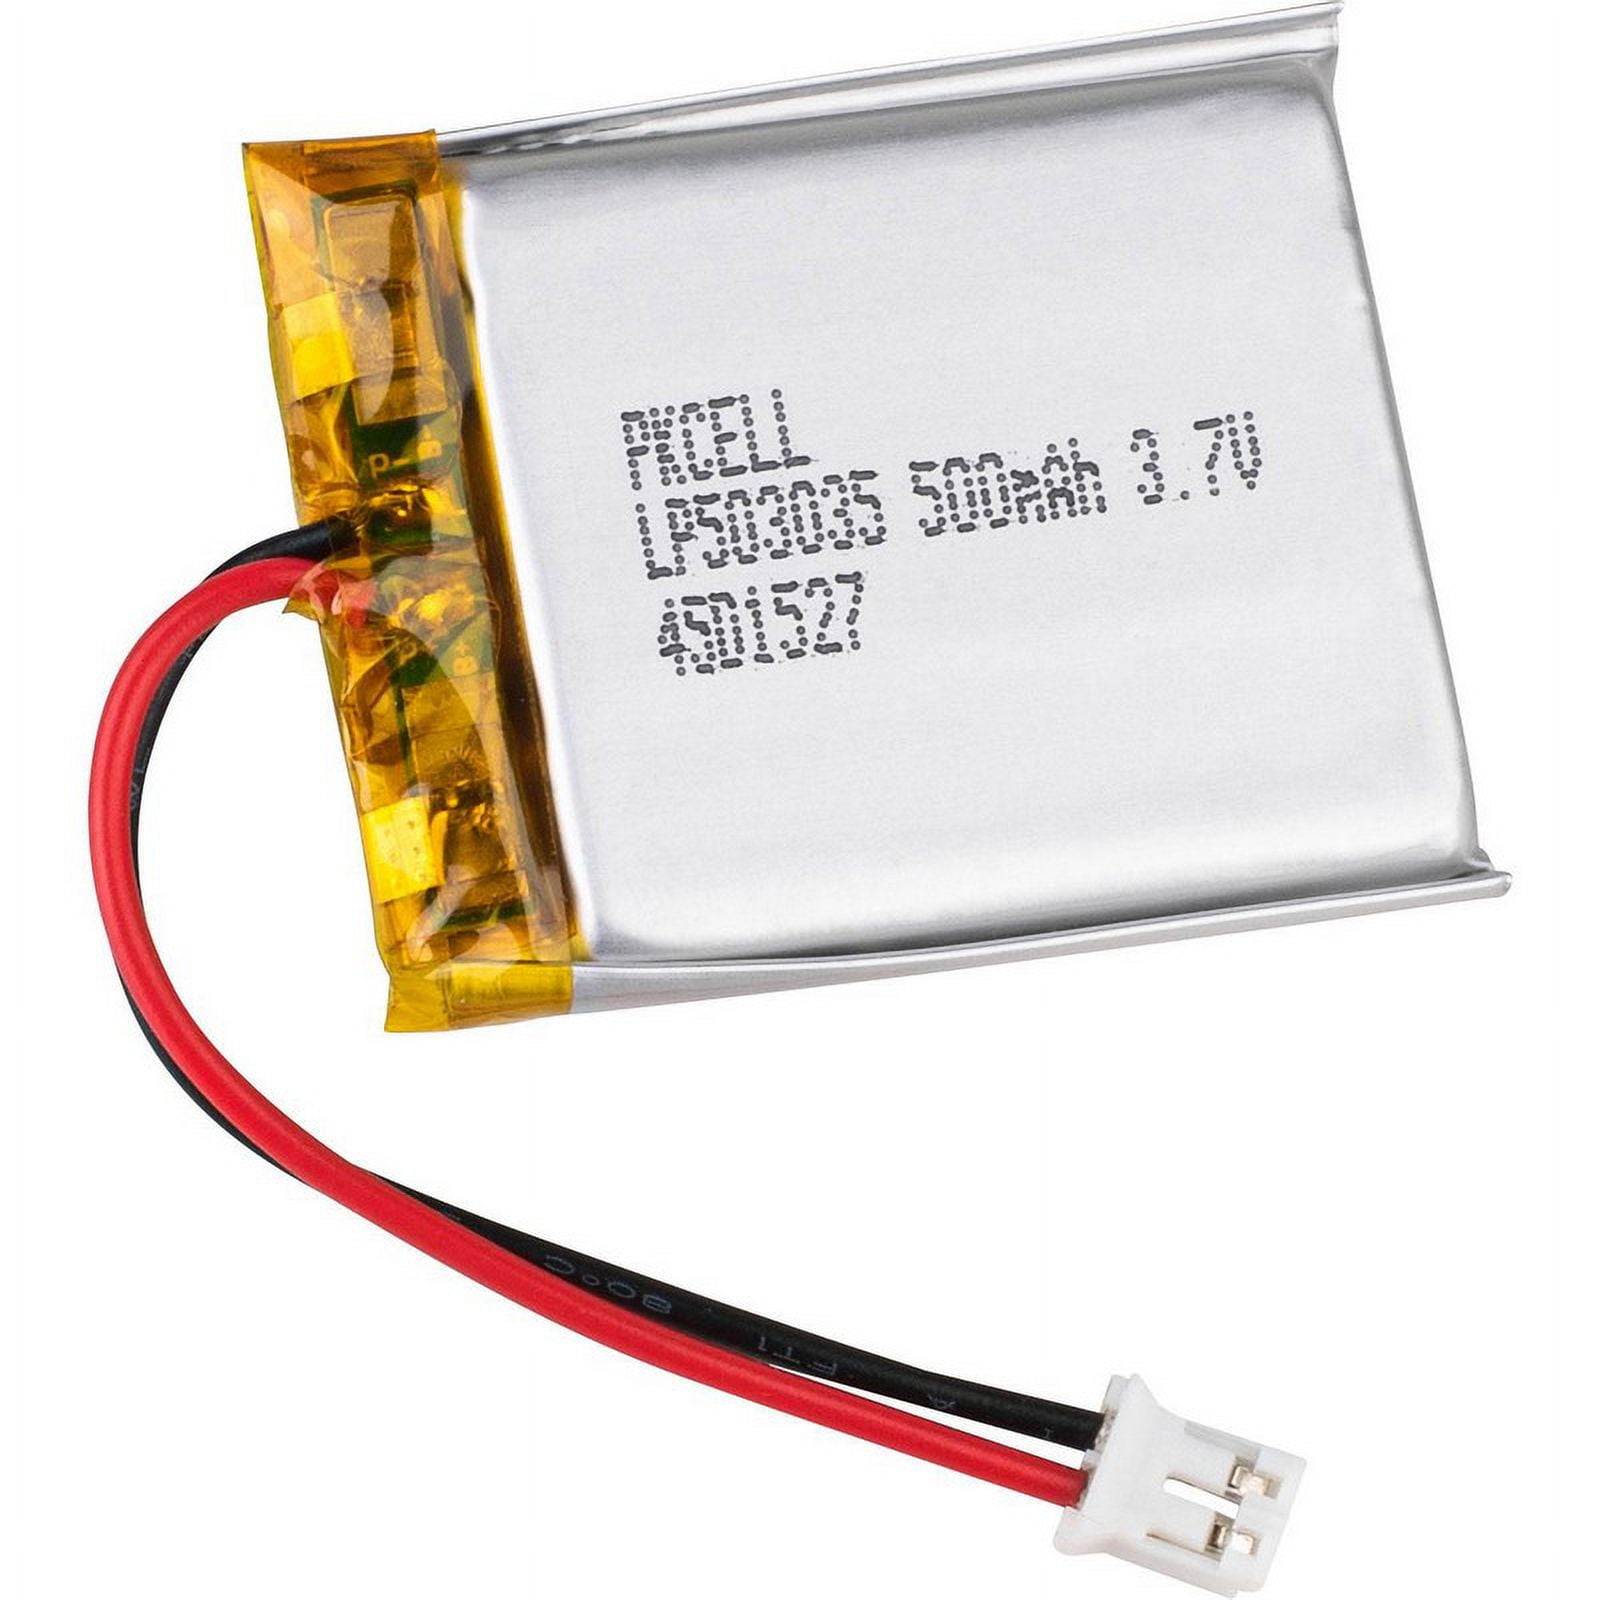 Kp 14500 3.7V 1000 Mah Connector Battery, Li Ion at Rs 65 in